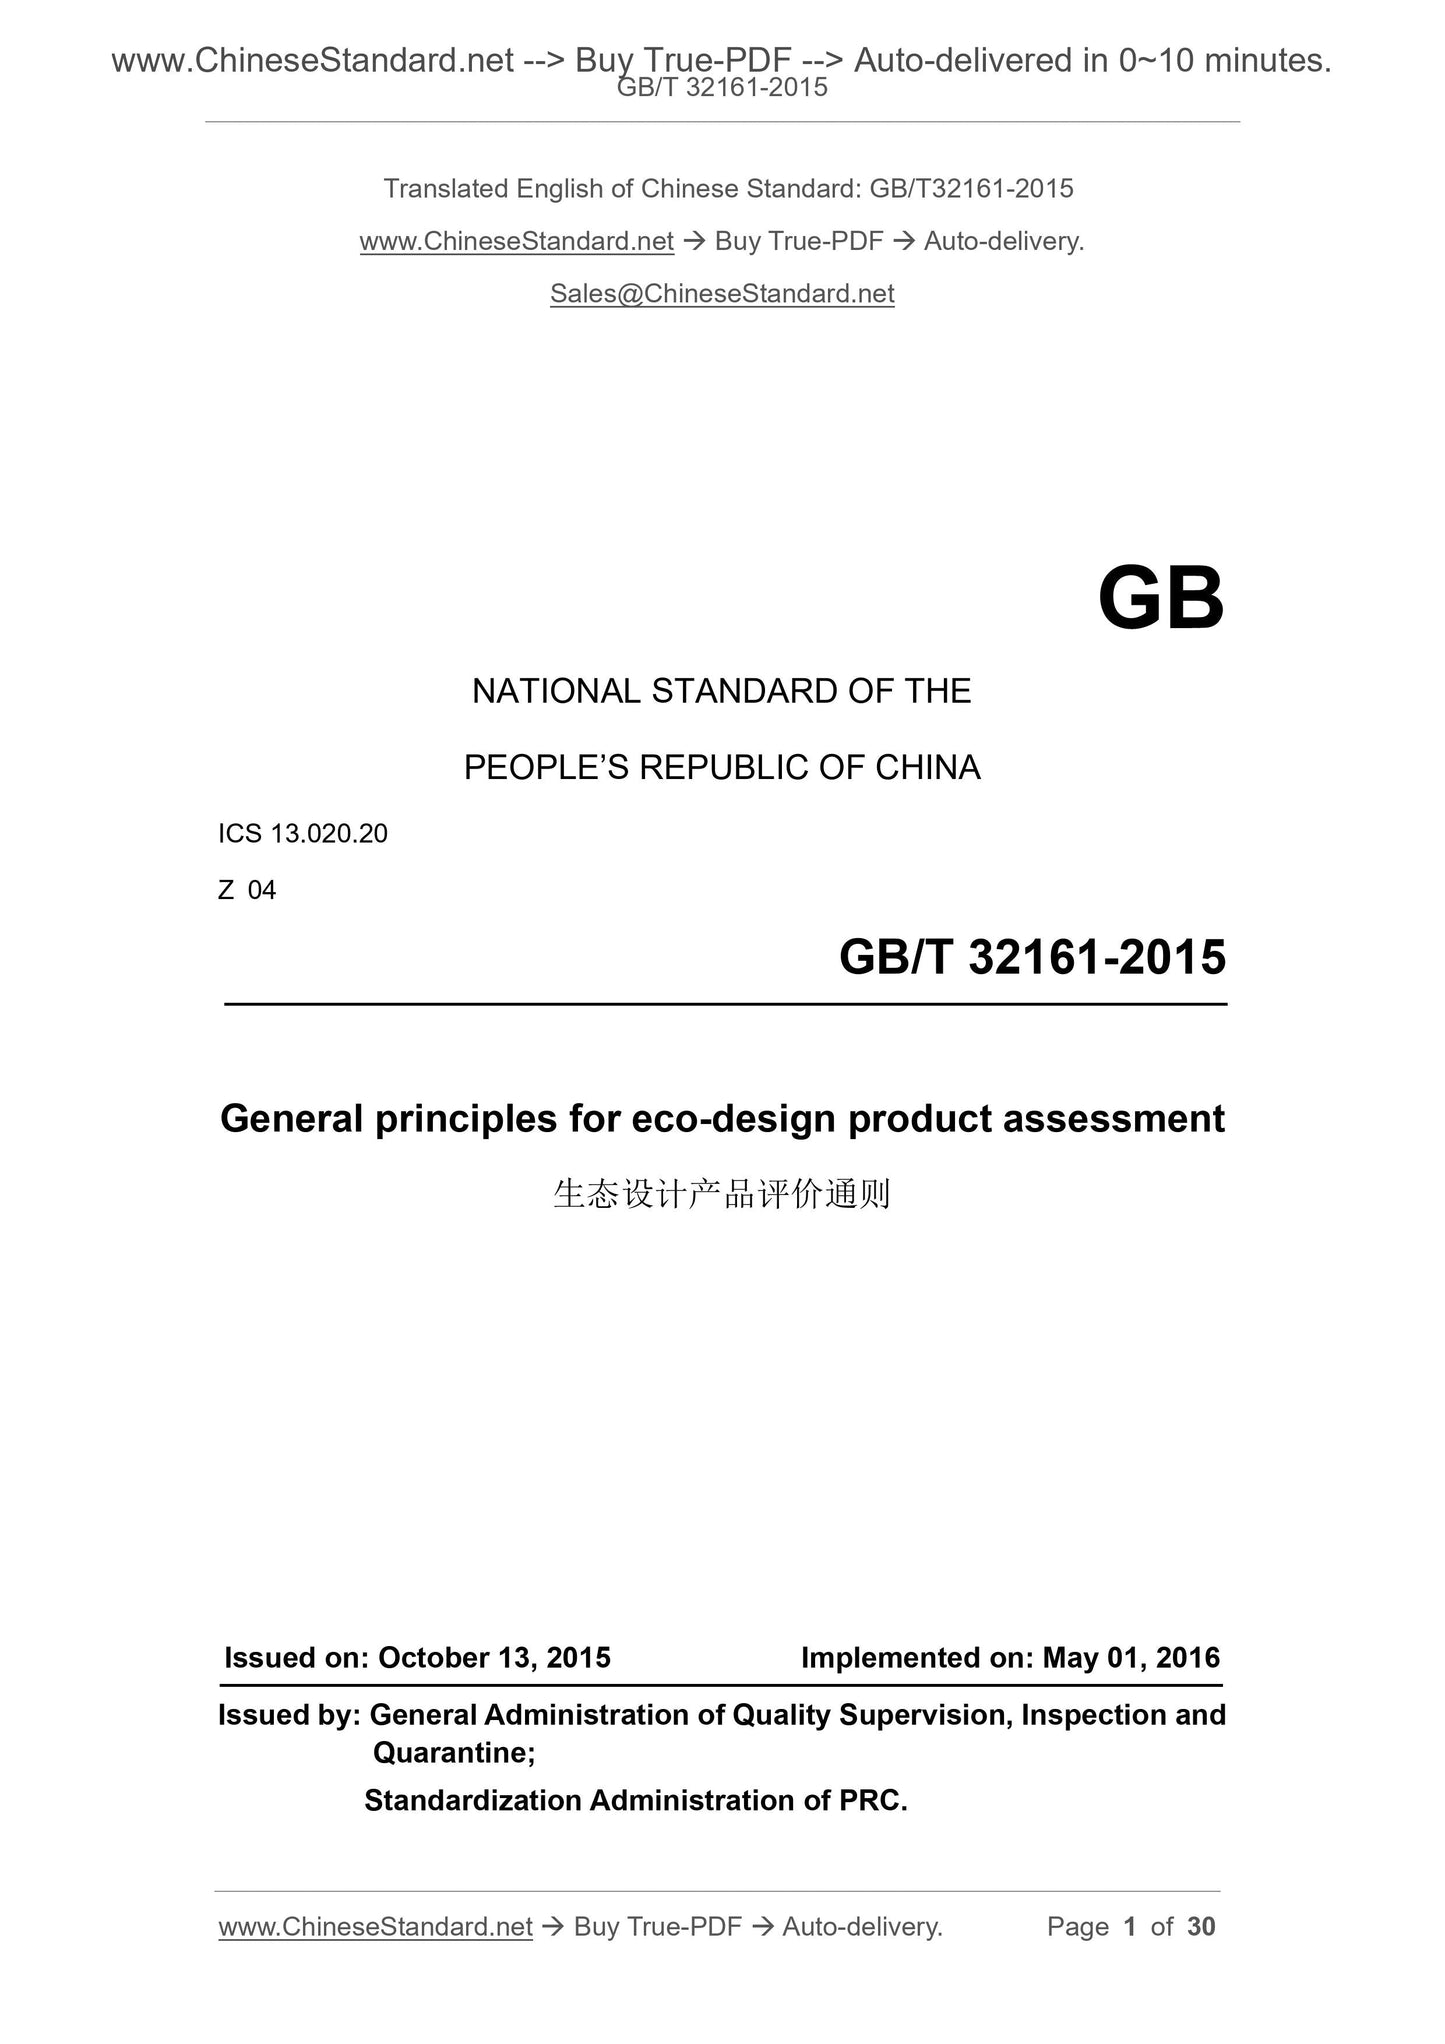 GB/T 32161-2015 Page 1